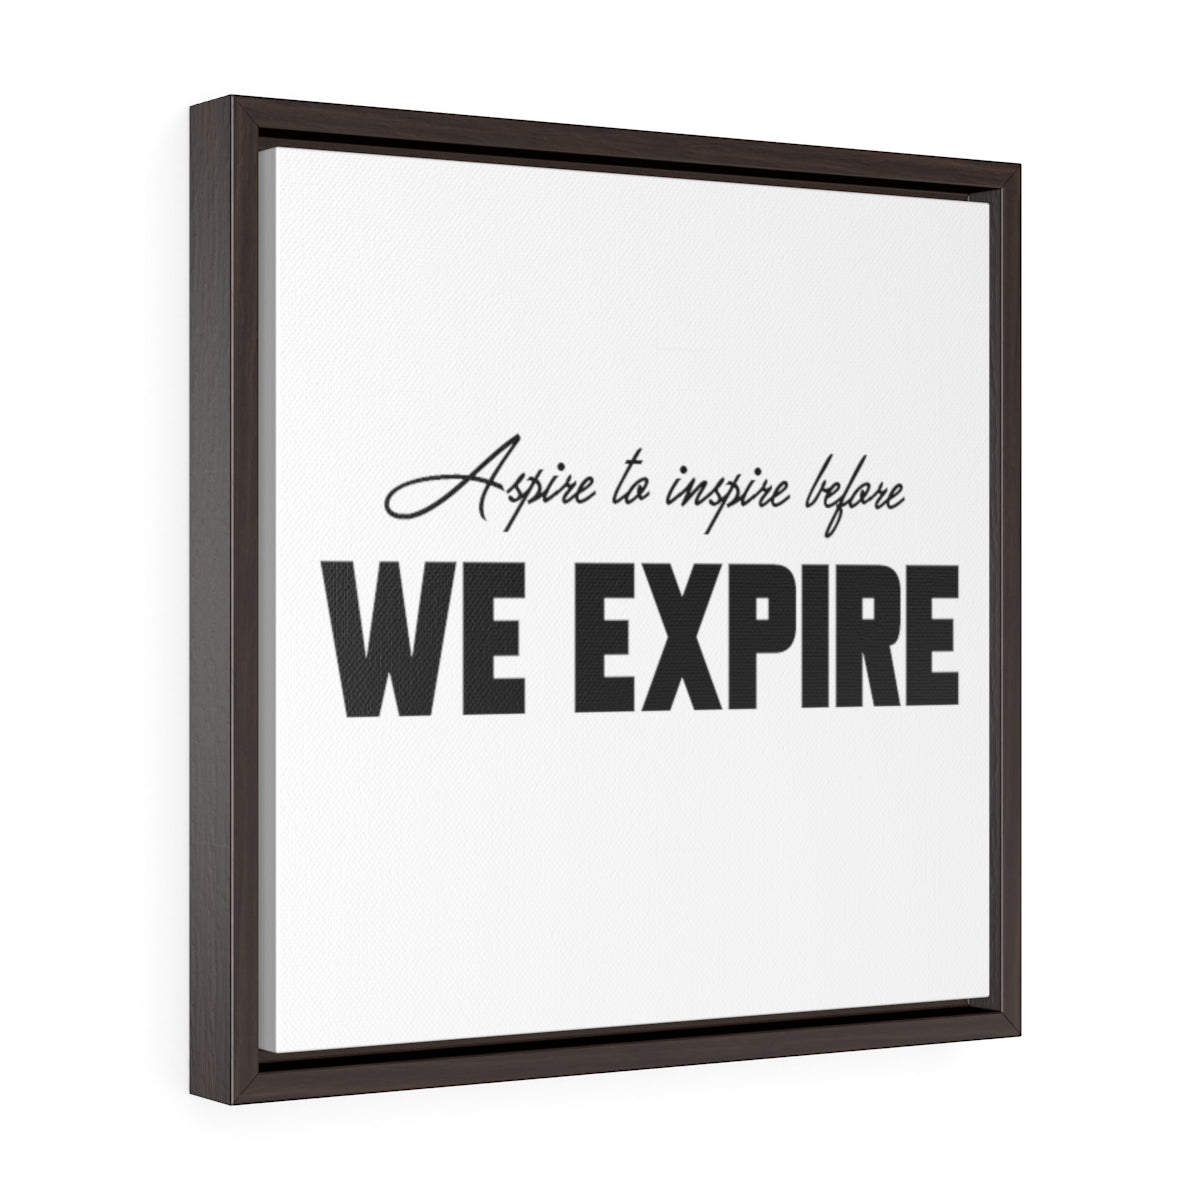 Aspire To Inspire Before We Expire | Framed Gallery Canvas